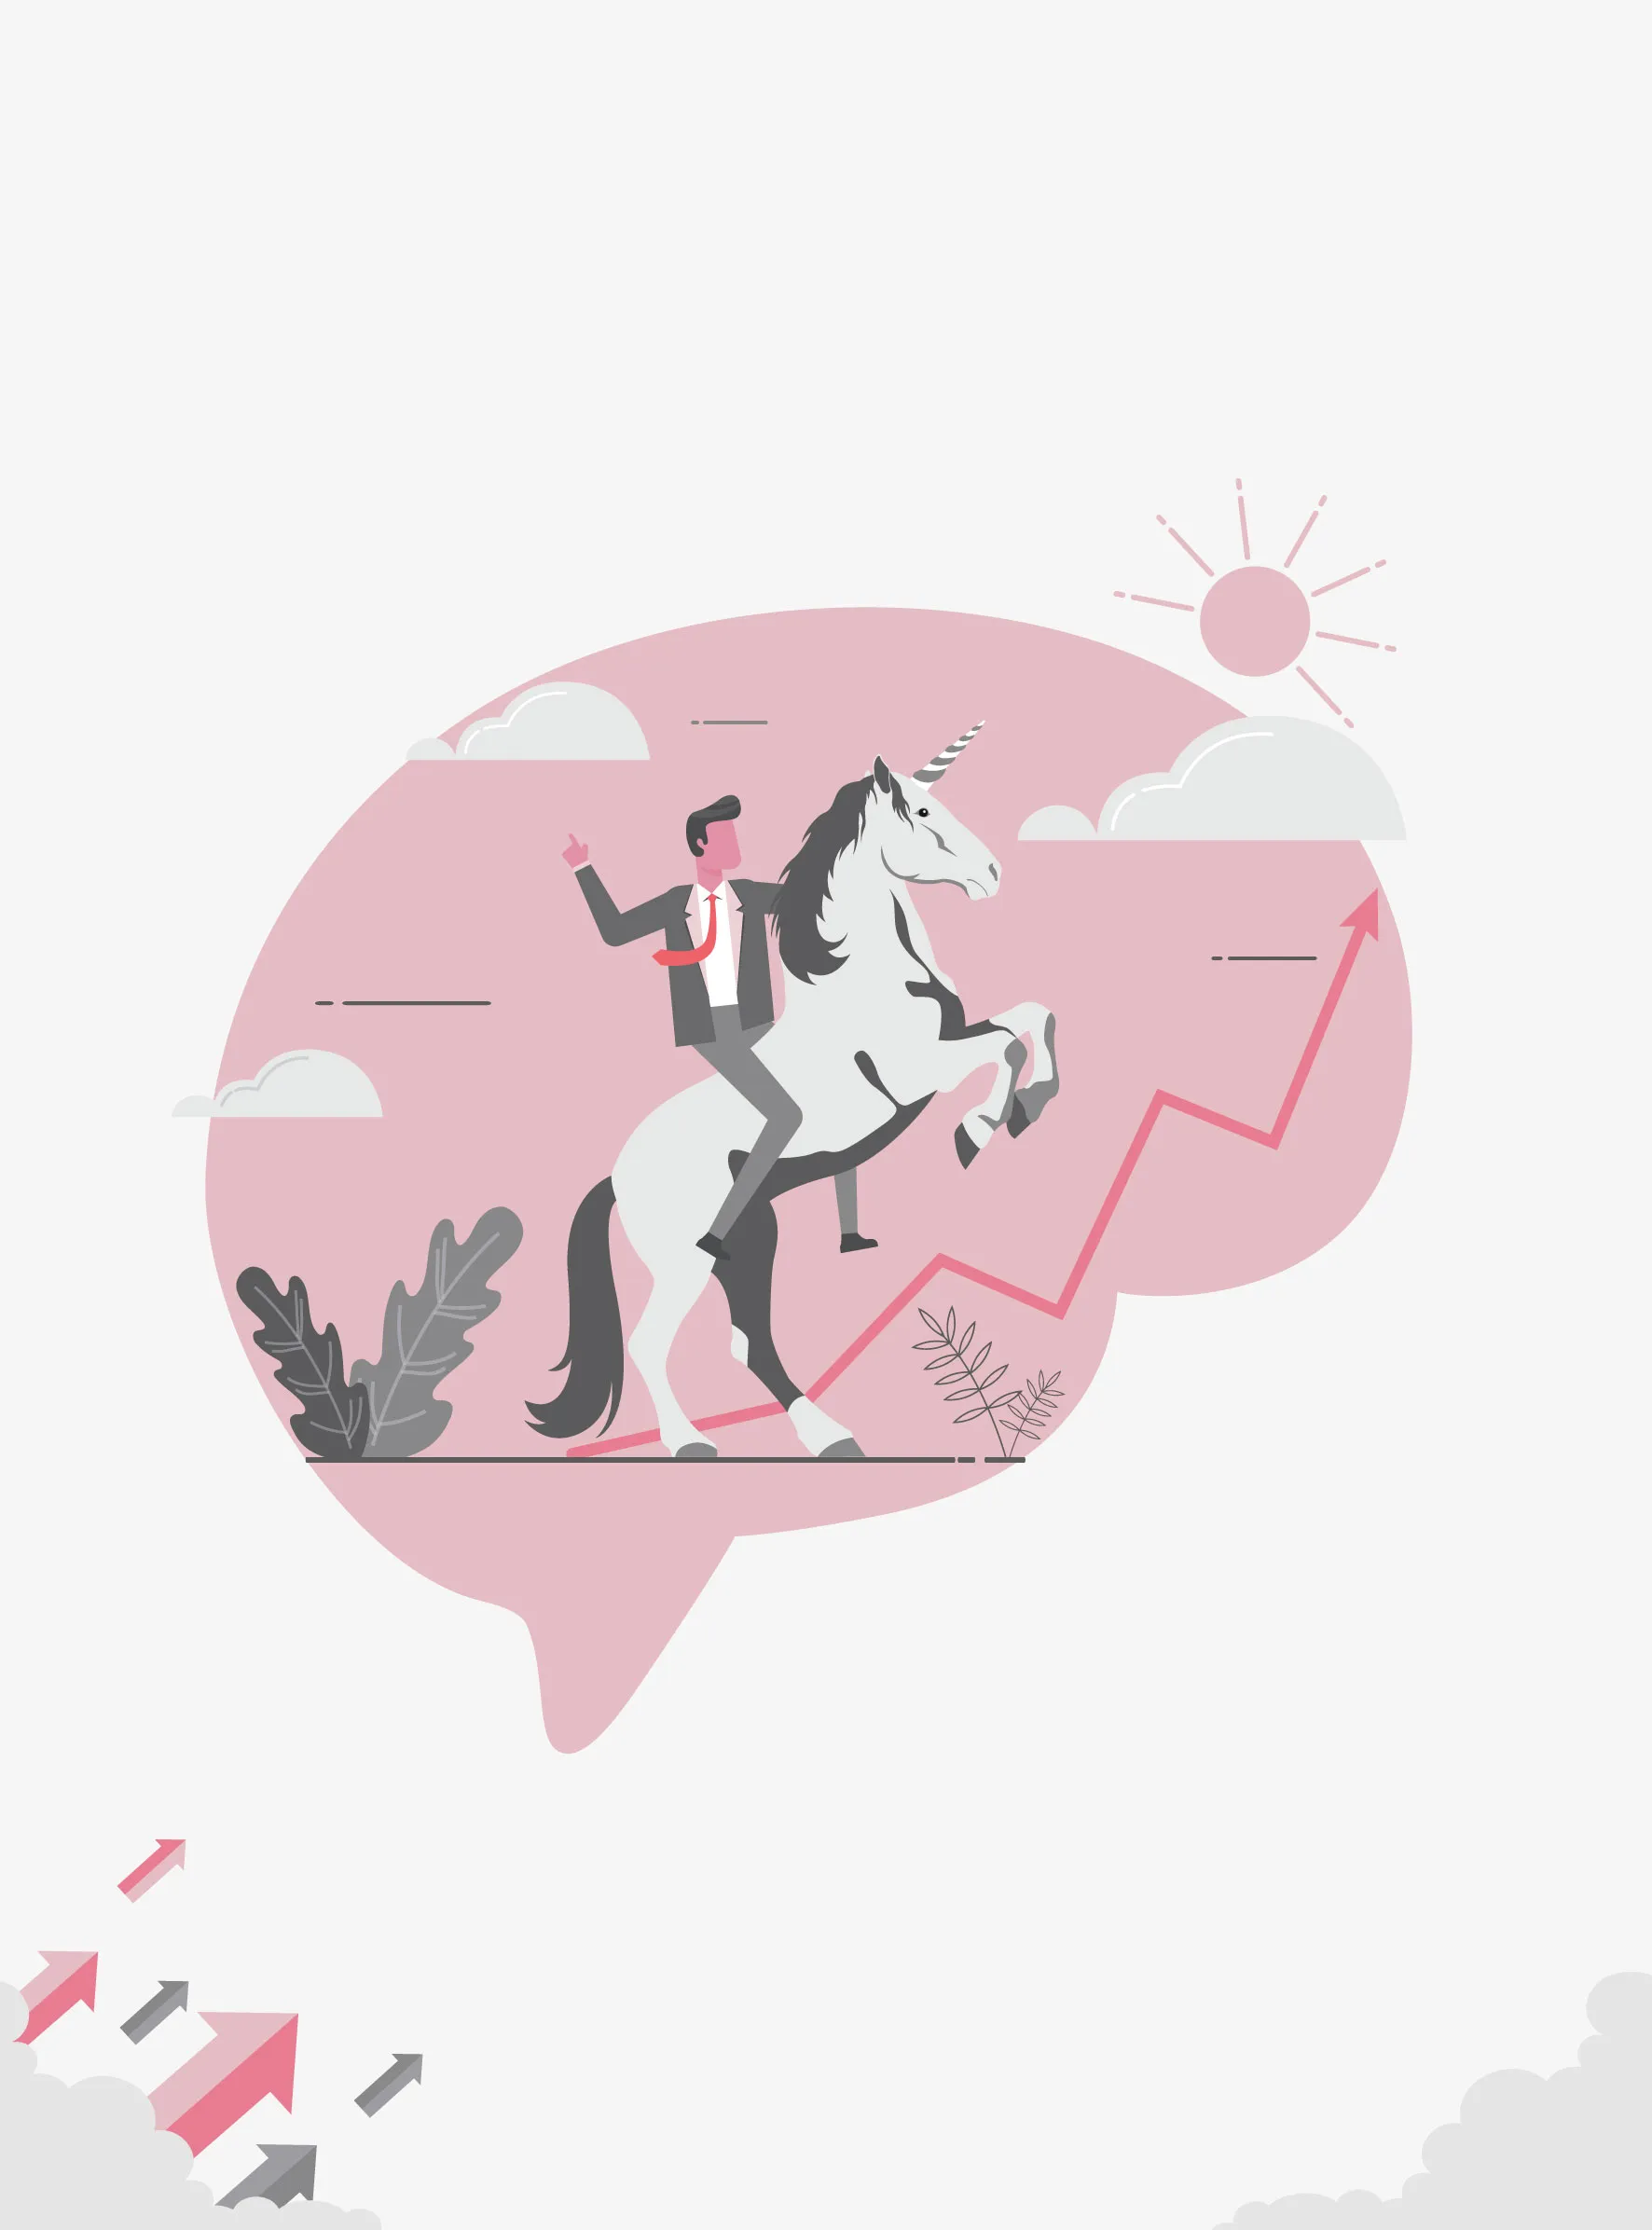 The unicorn mindset market disruptions and intuitive decisions